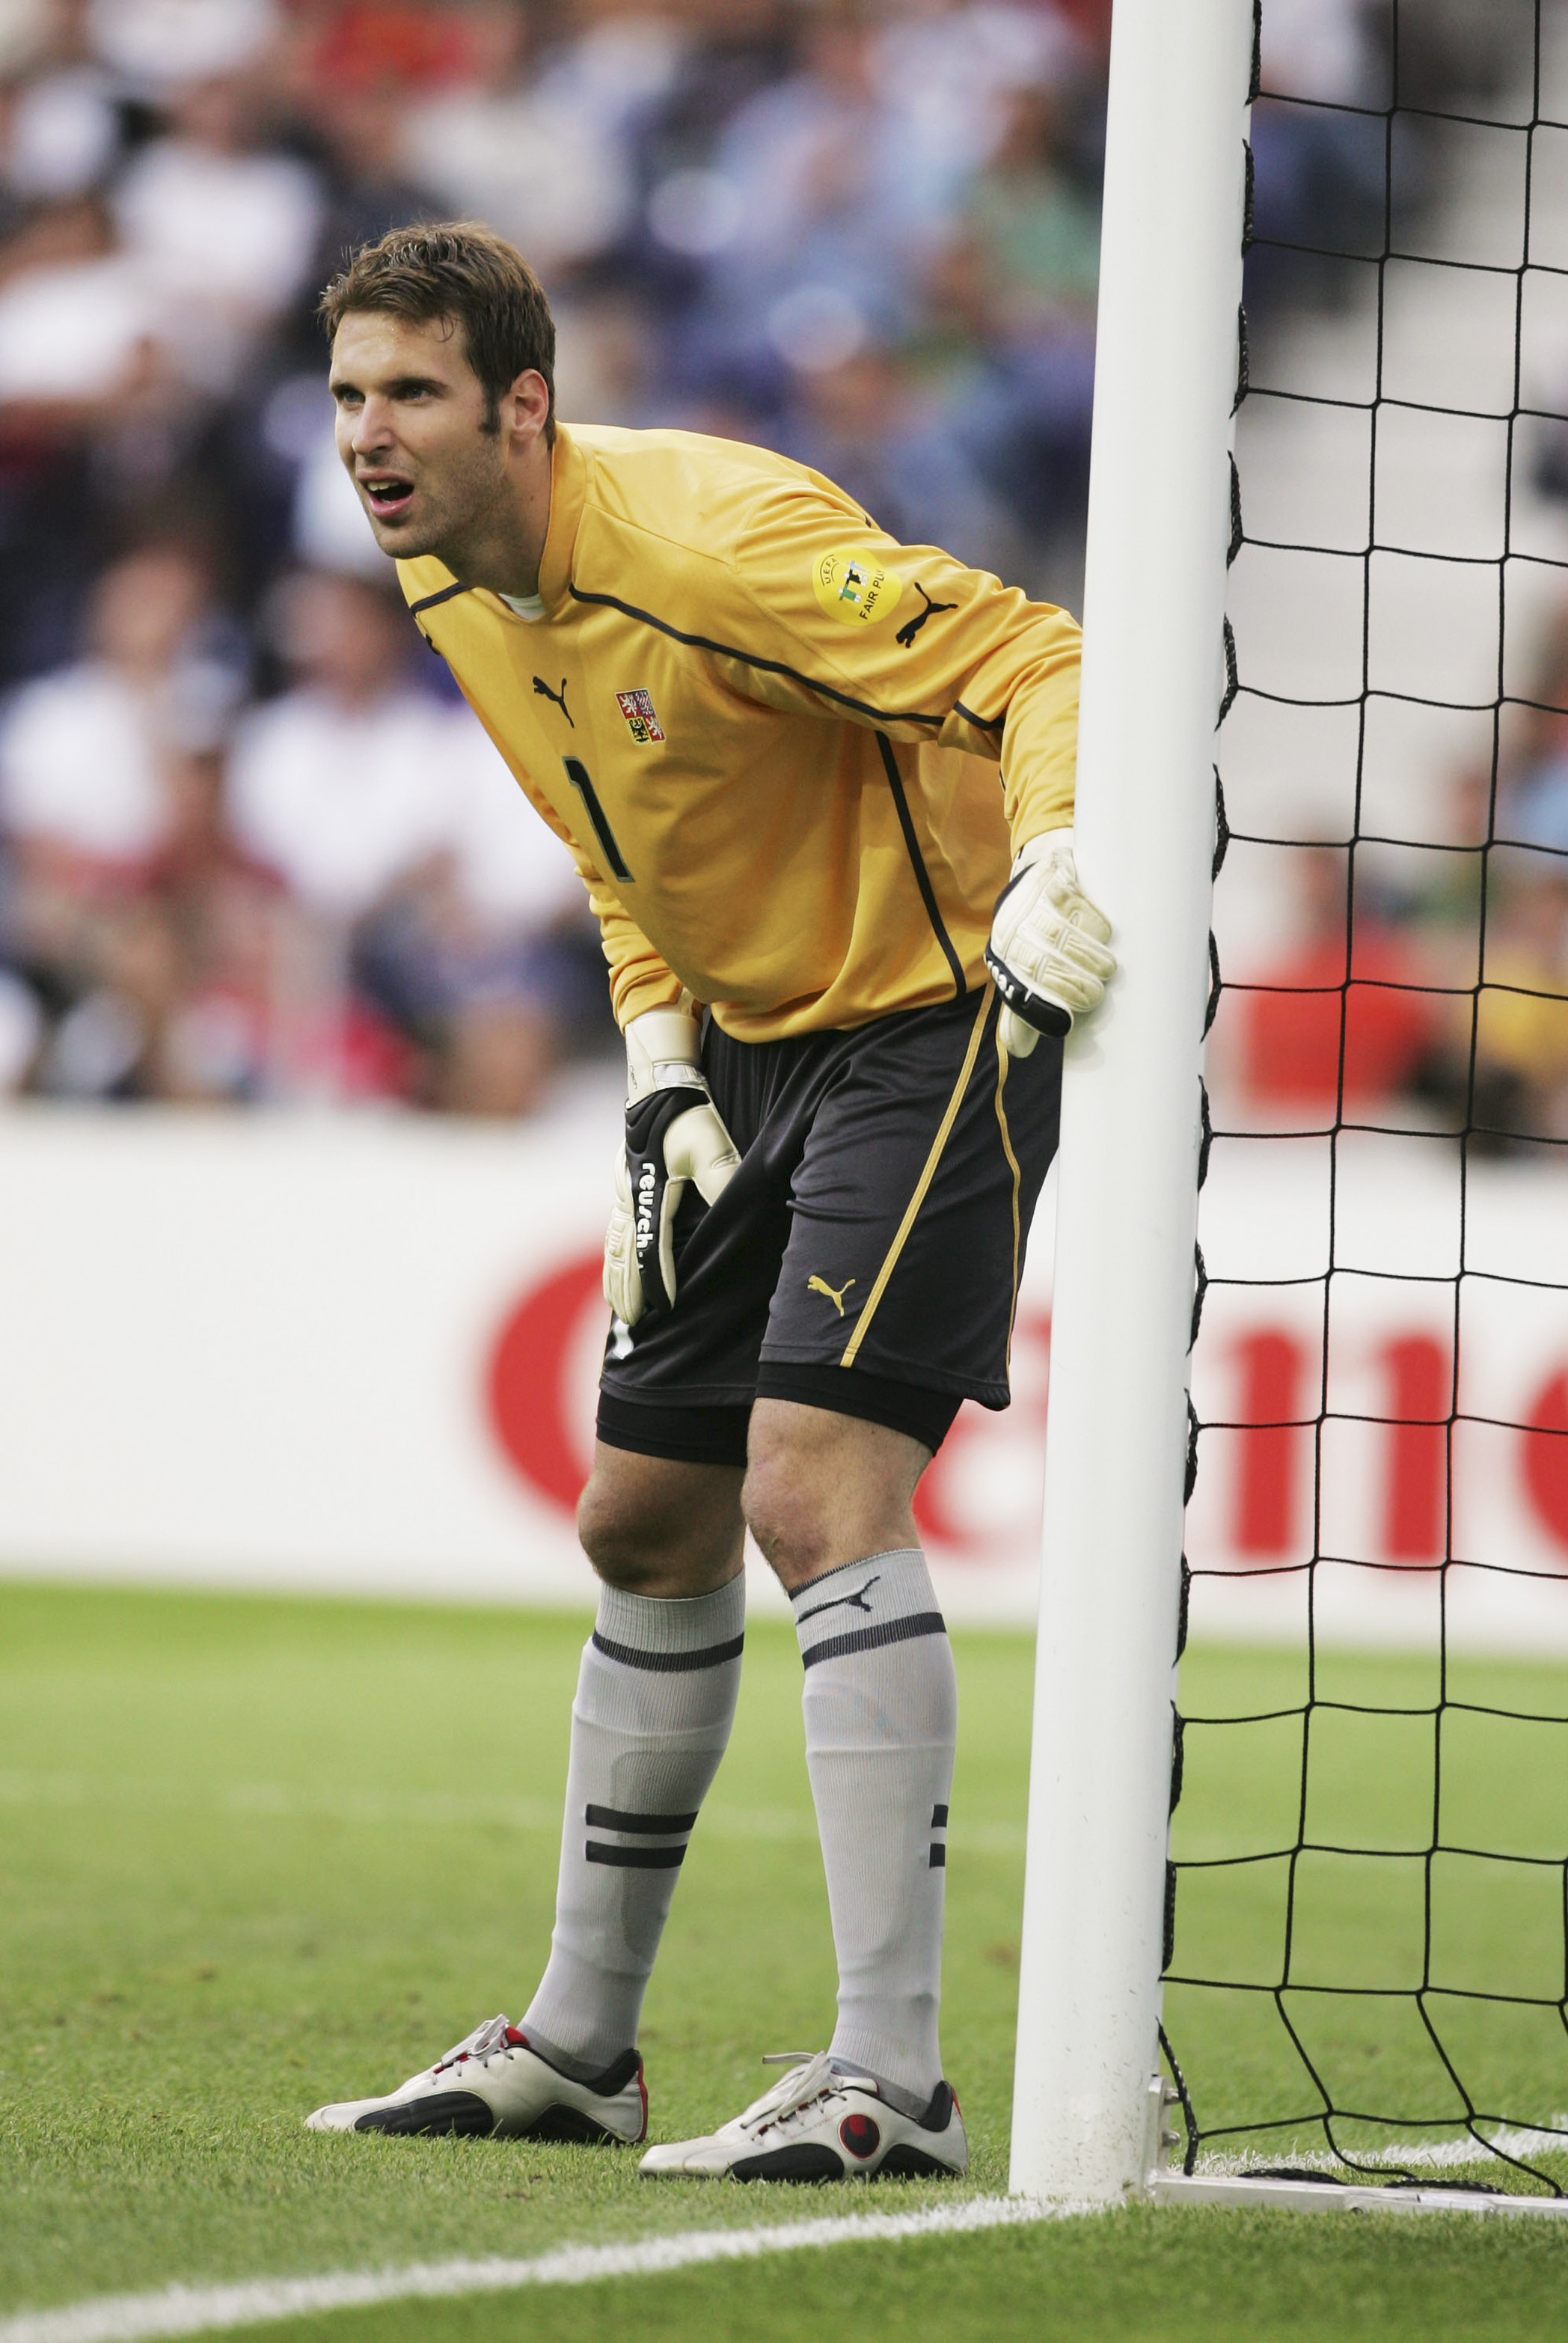 PORTO, PORTUGAL - JULY 1:  Petr Cech of Czech Republic in action during the UEFA Euro 2004, Semi Final match between Greece and Czech Republic at the Dragao Stadium on July 1, 2004 in Porto, Portugal. (Photo by Alex Livesey/Getty Images)